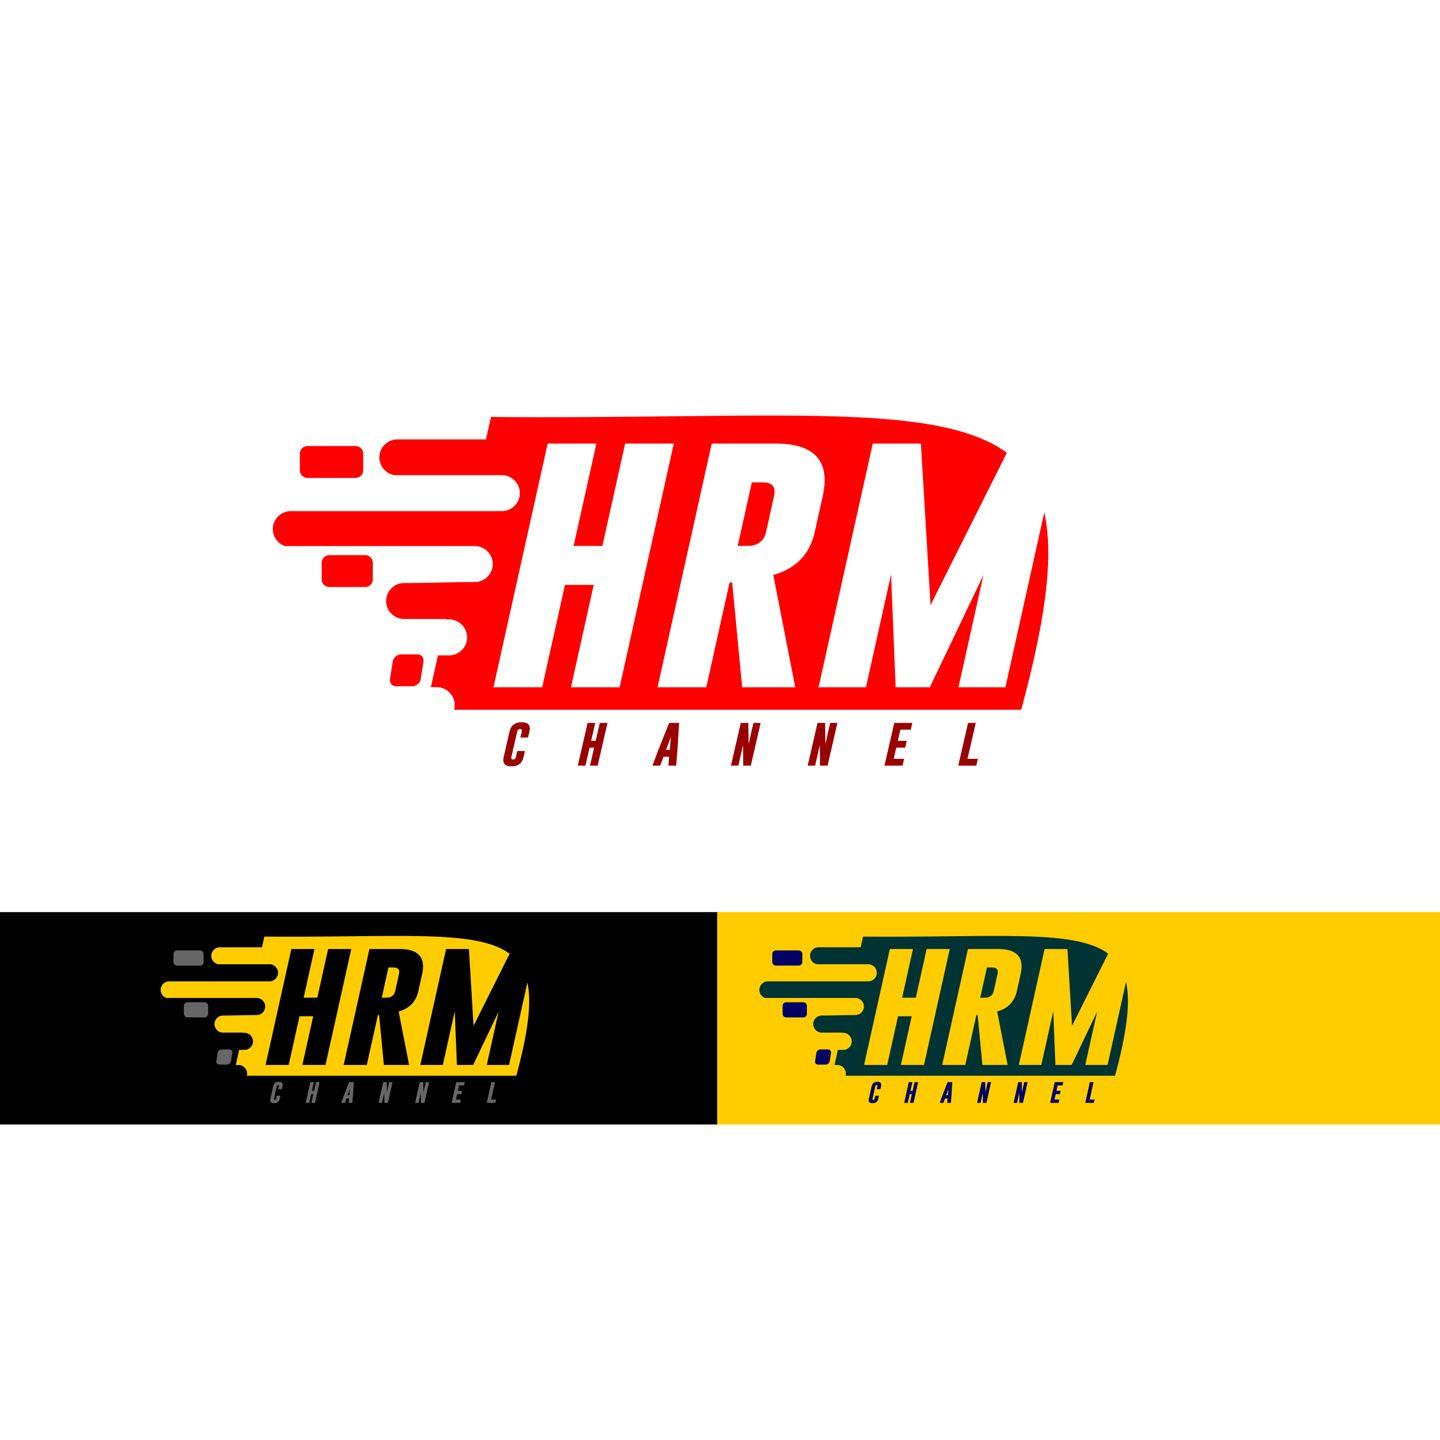 HRM Logo - Bold, Serious, Consulting Logo Design for HRM Channel